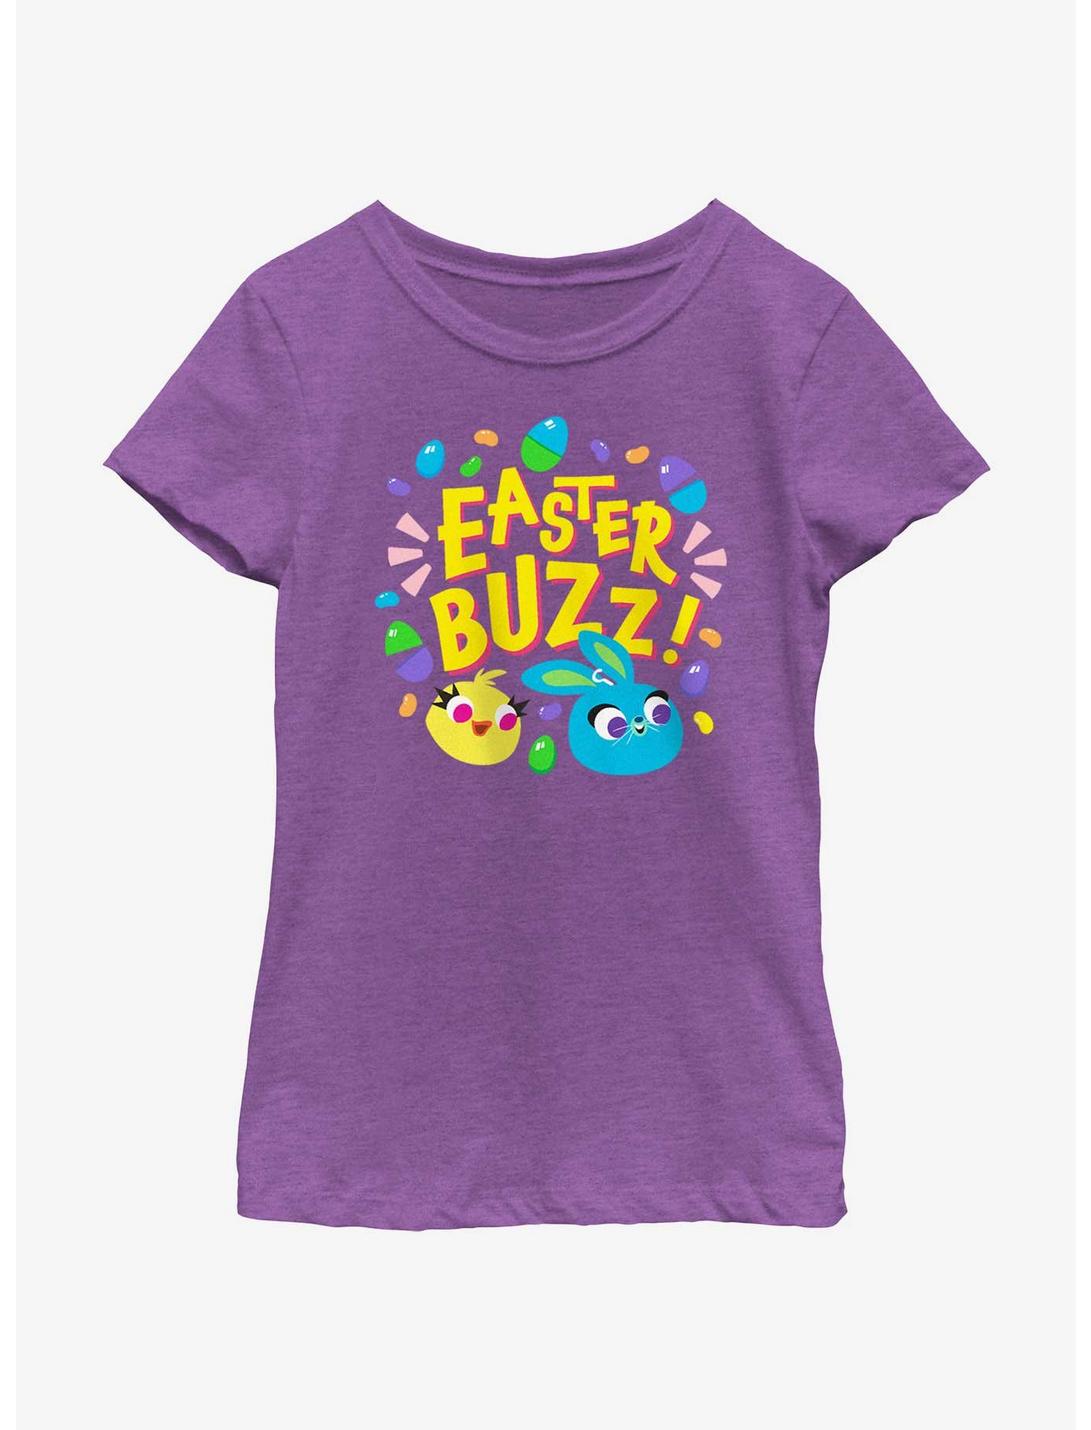 Disney Pixar Toy Story 4 Easter Buzz Youth Girls T-Shirt, PURPLE BERRY, hi-res